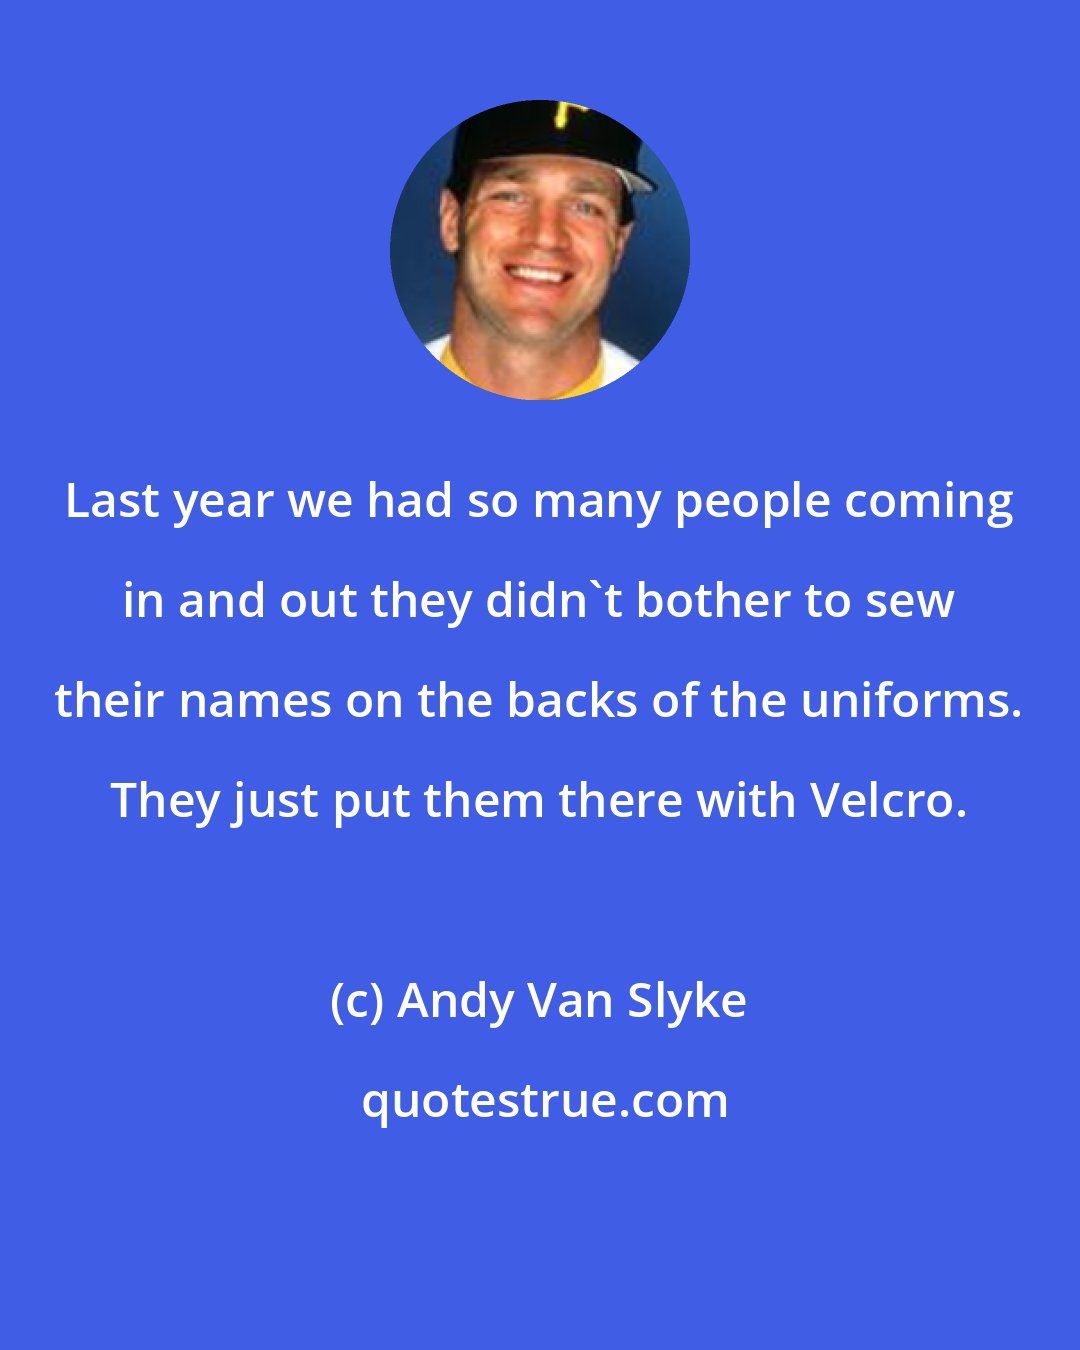 Andy Van Slyke: Last year we had so many people coming in and out they didn't bother to sew their names on the backs of the uniforms. They just put them there with Velcro.